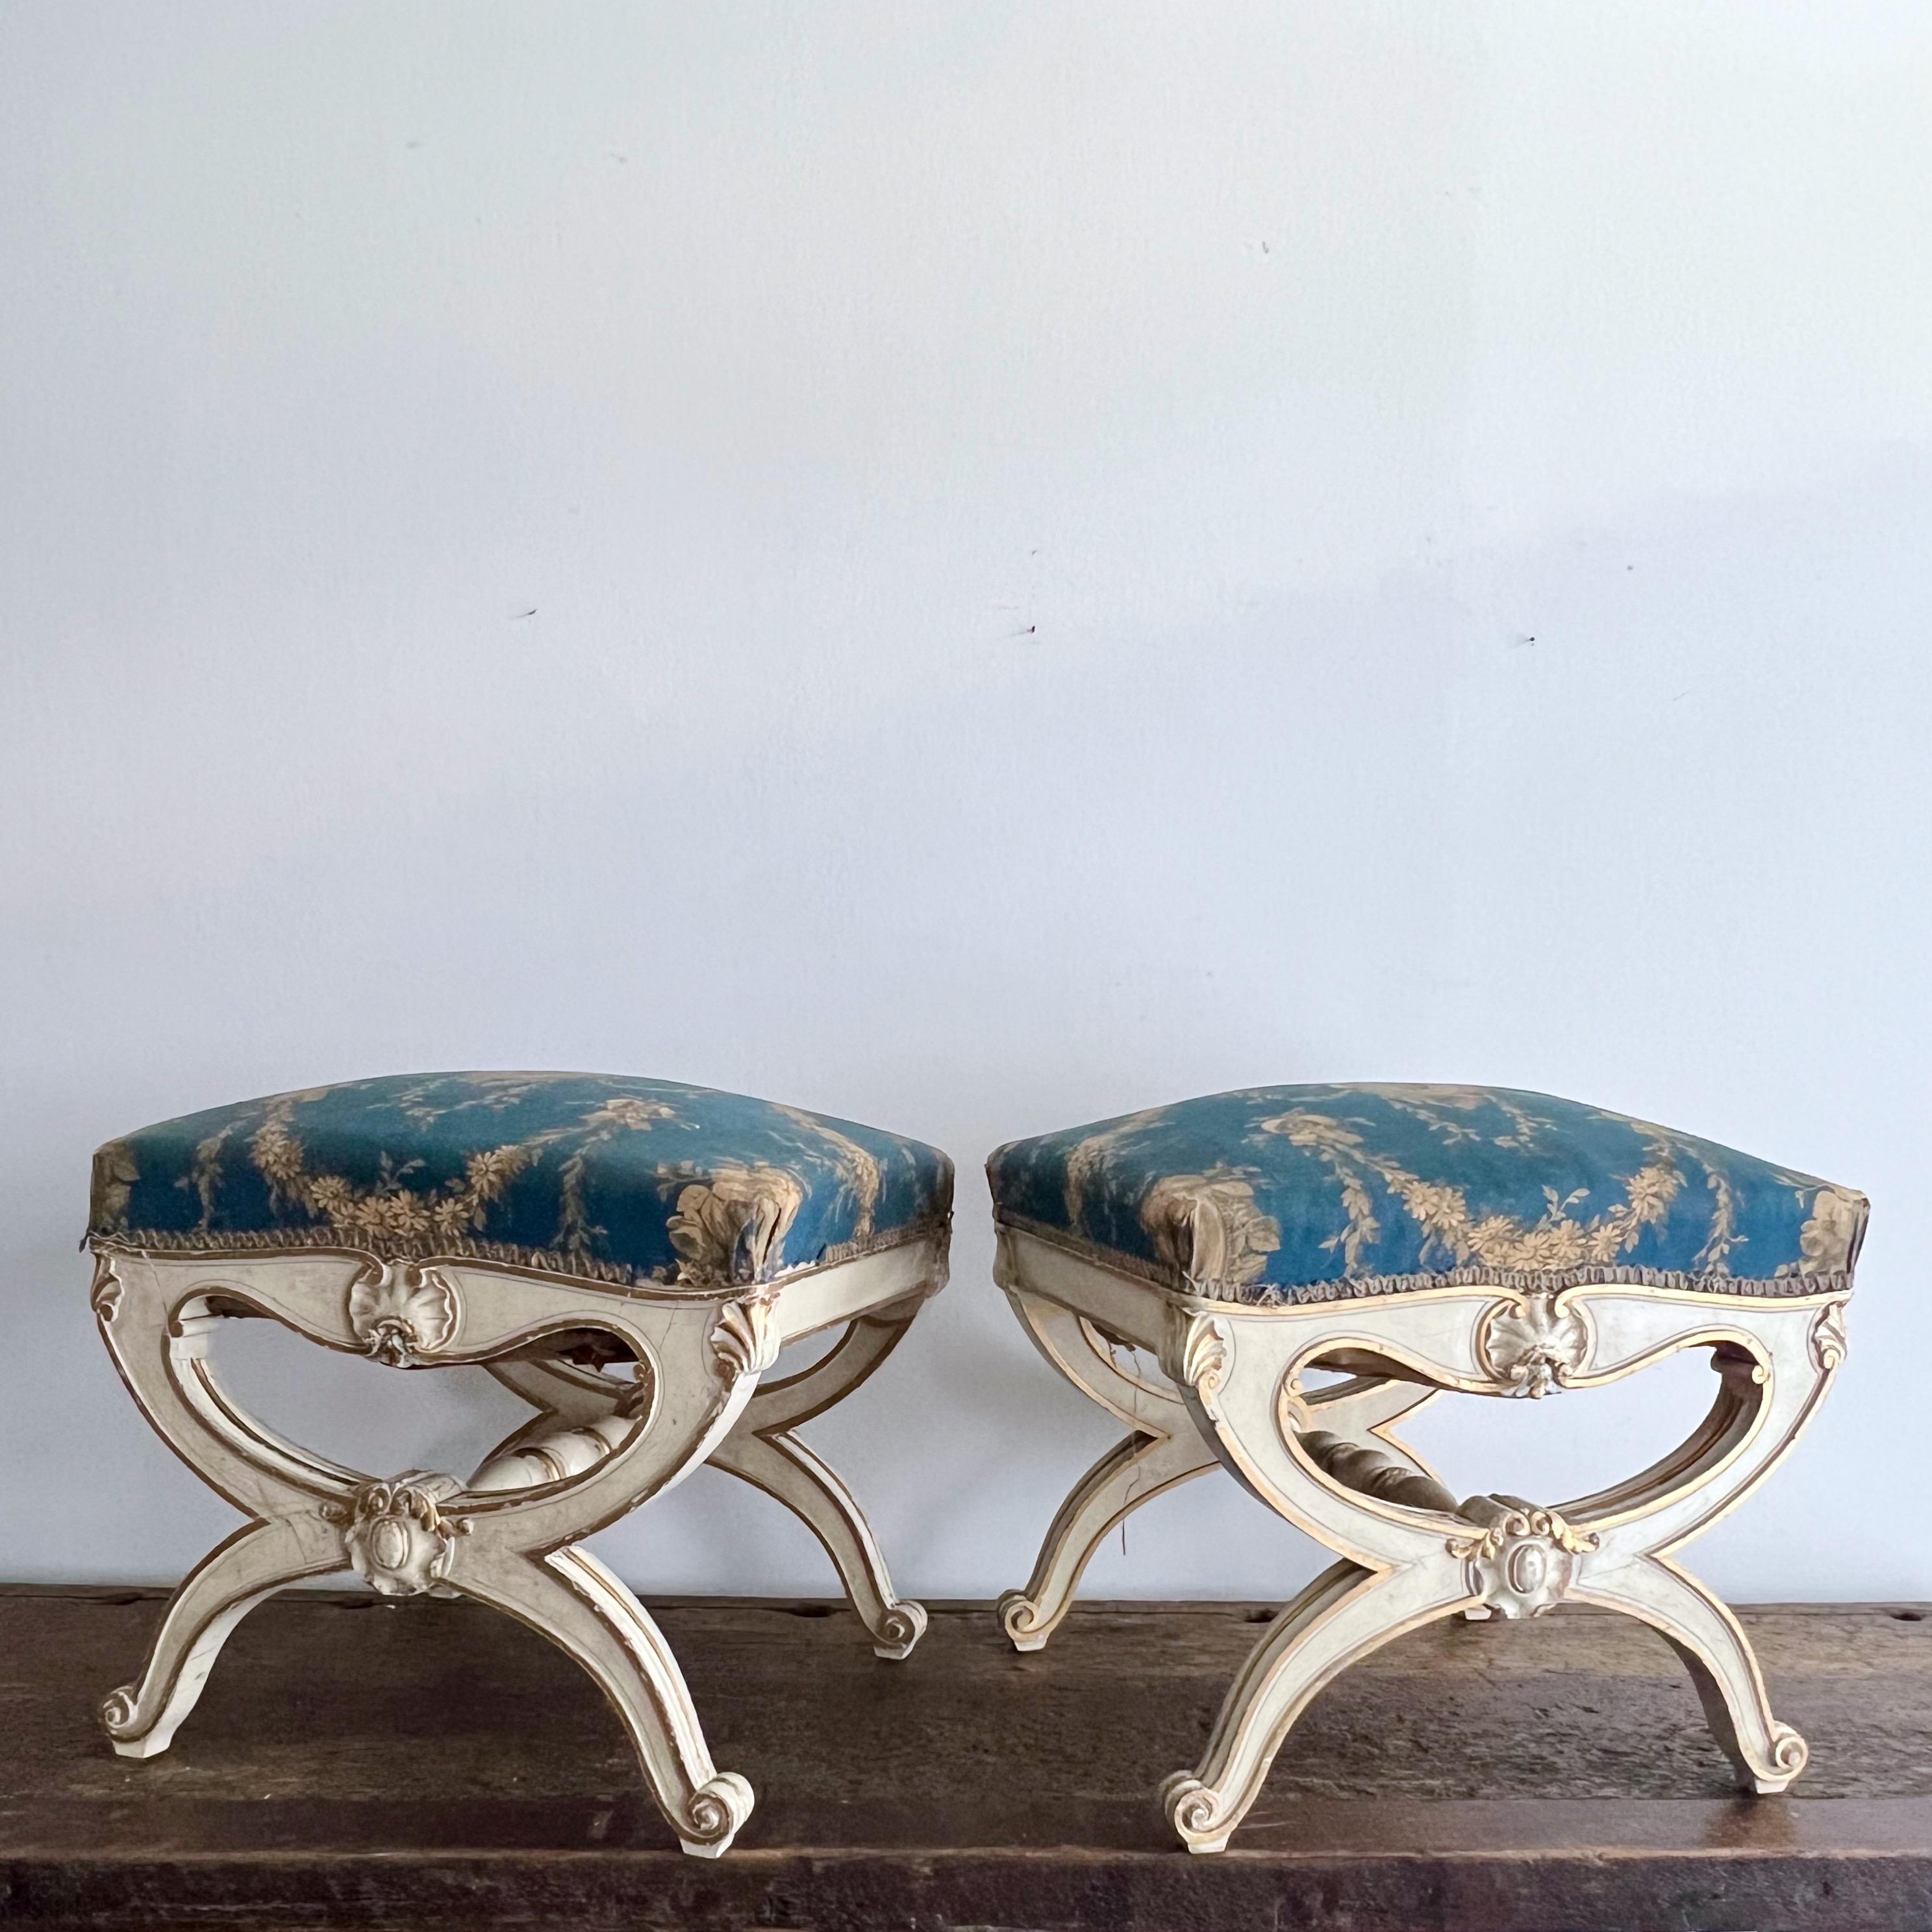 Pair of 19th century Italian Polychrome and Parcel-Gilt Curule Stools In Good Condition For Sale In Charleston, SC